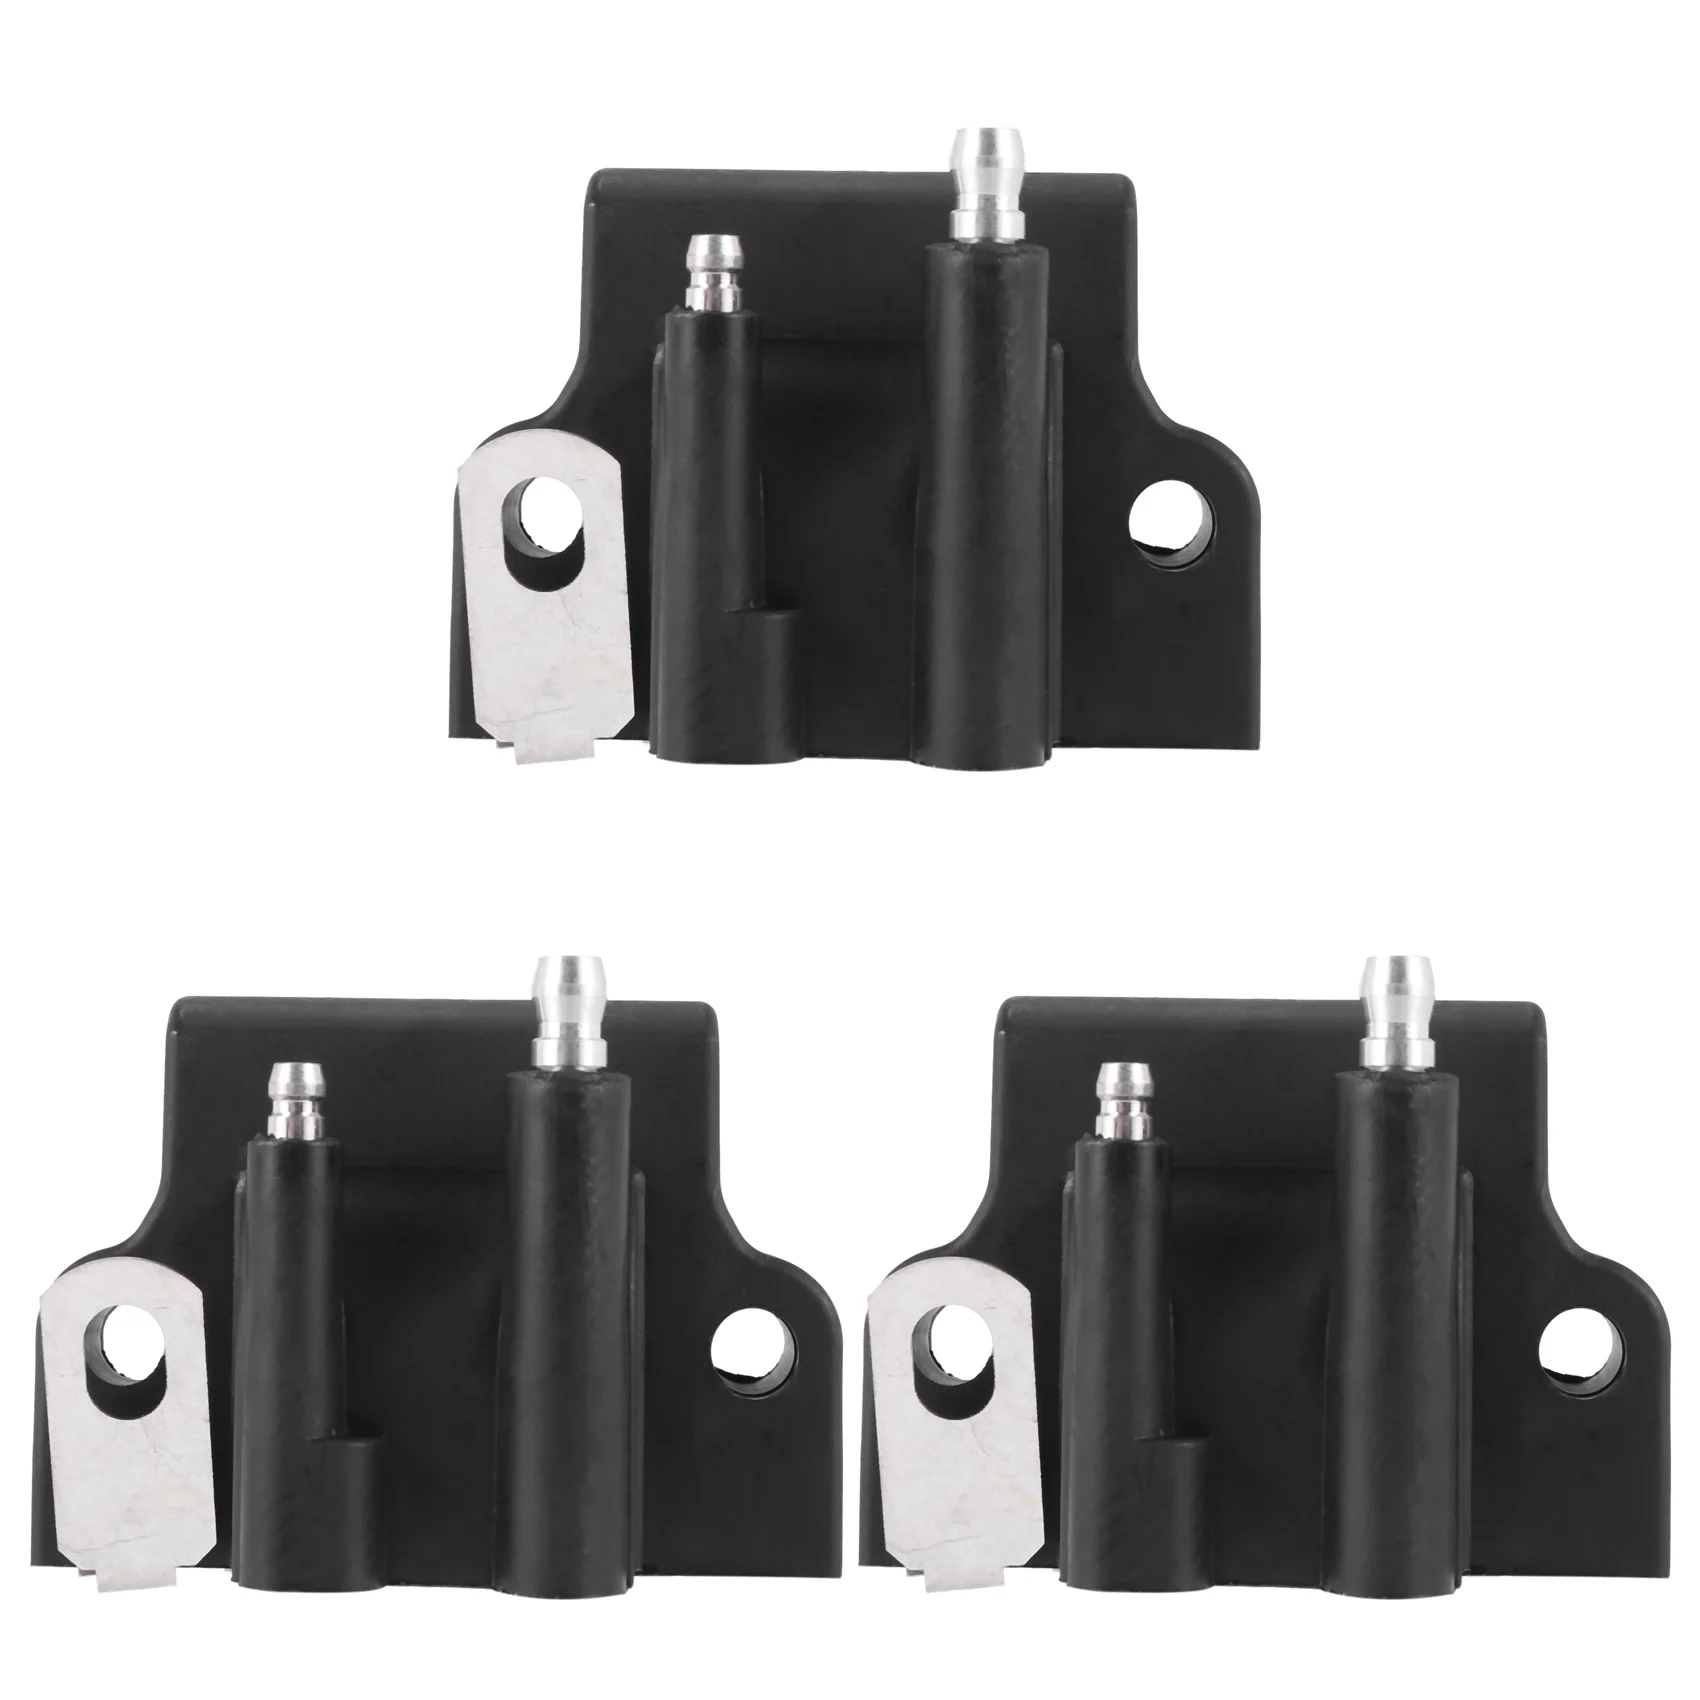 

3X Ignition Coil for Johnson Evinrude 582508 18 - 5179 183 - 2508 Outboard Engine